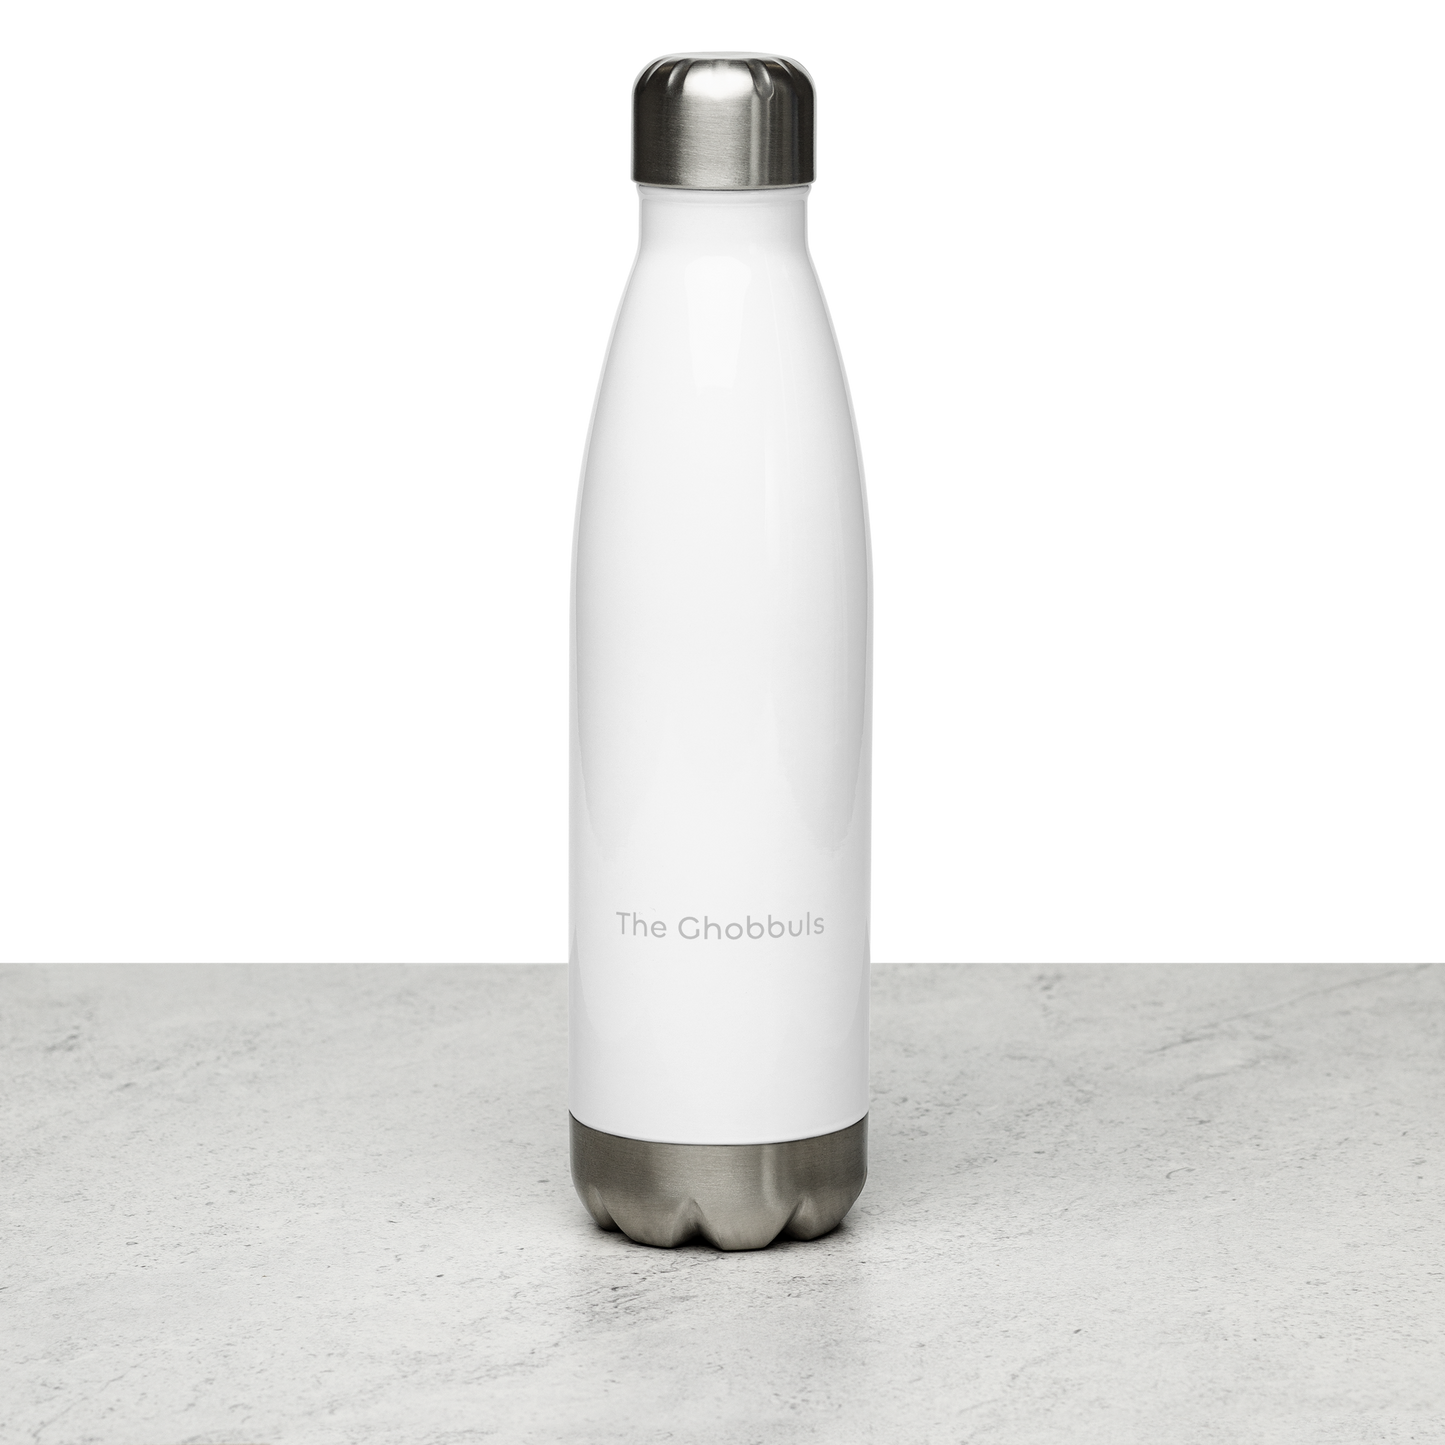 Win the Game! Stainless Steel Water Bottle